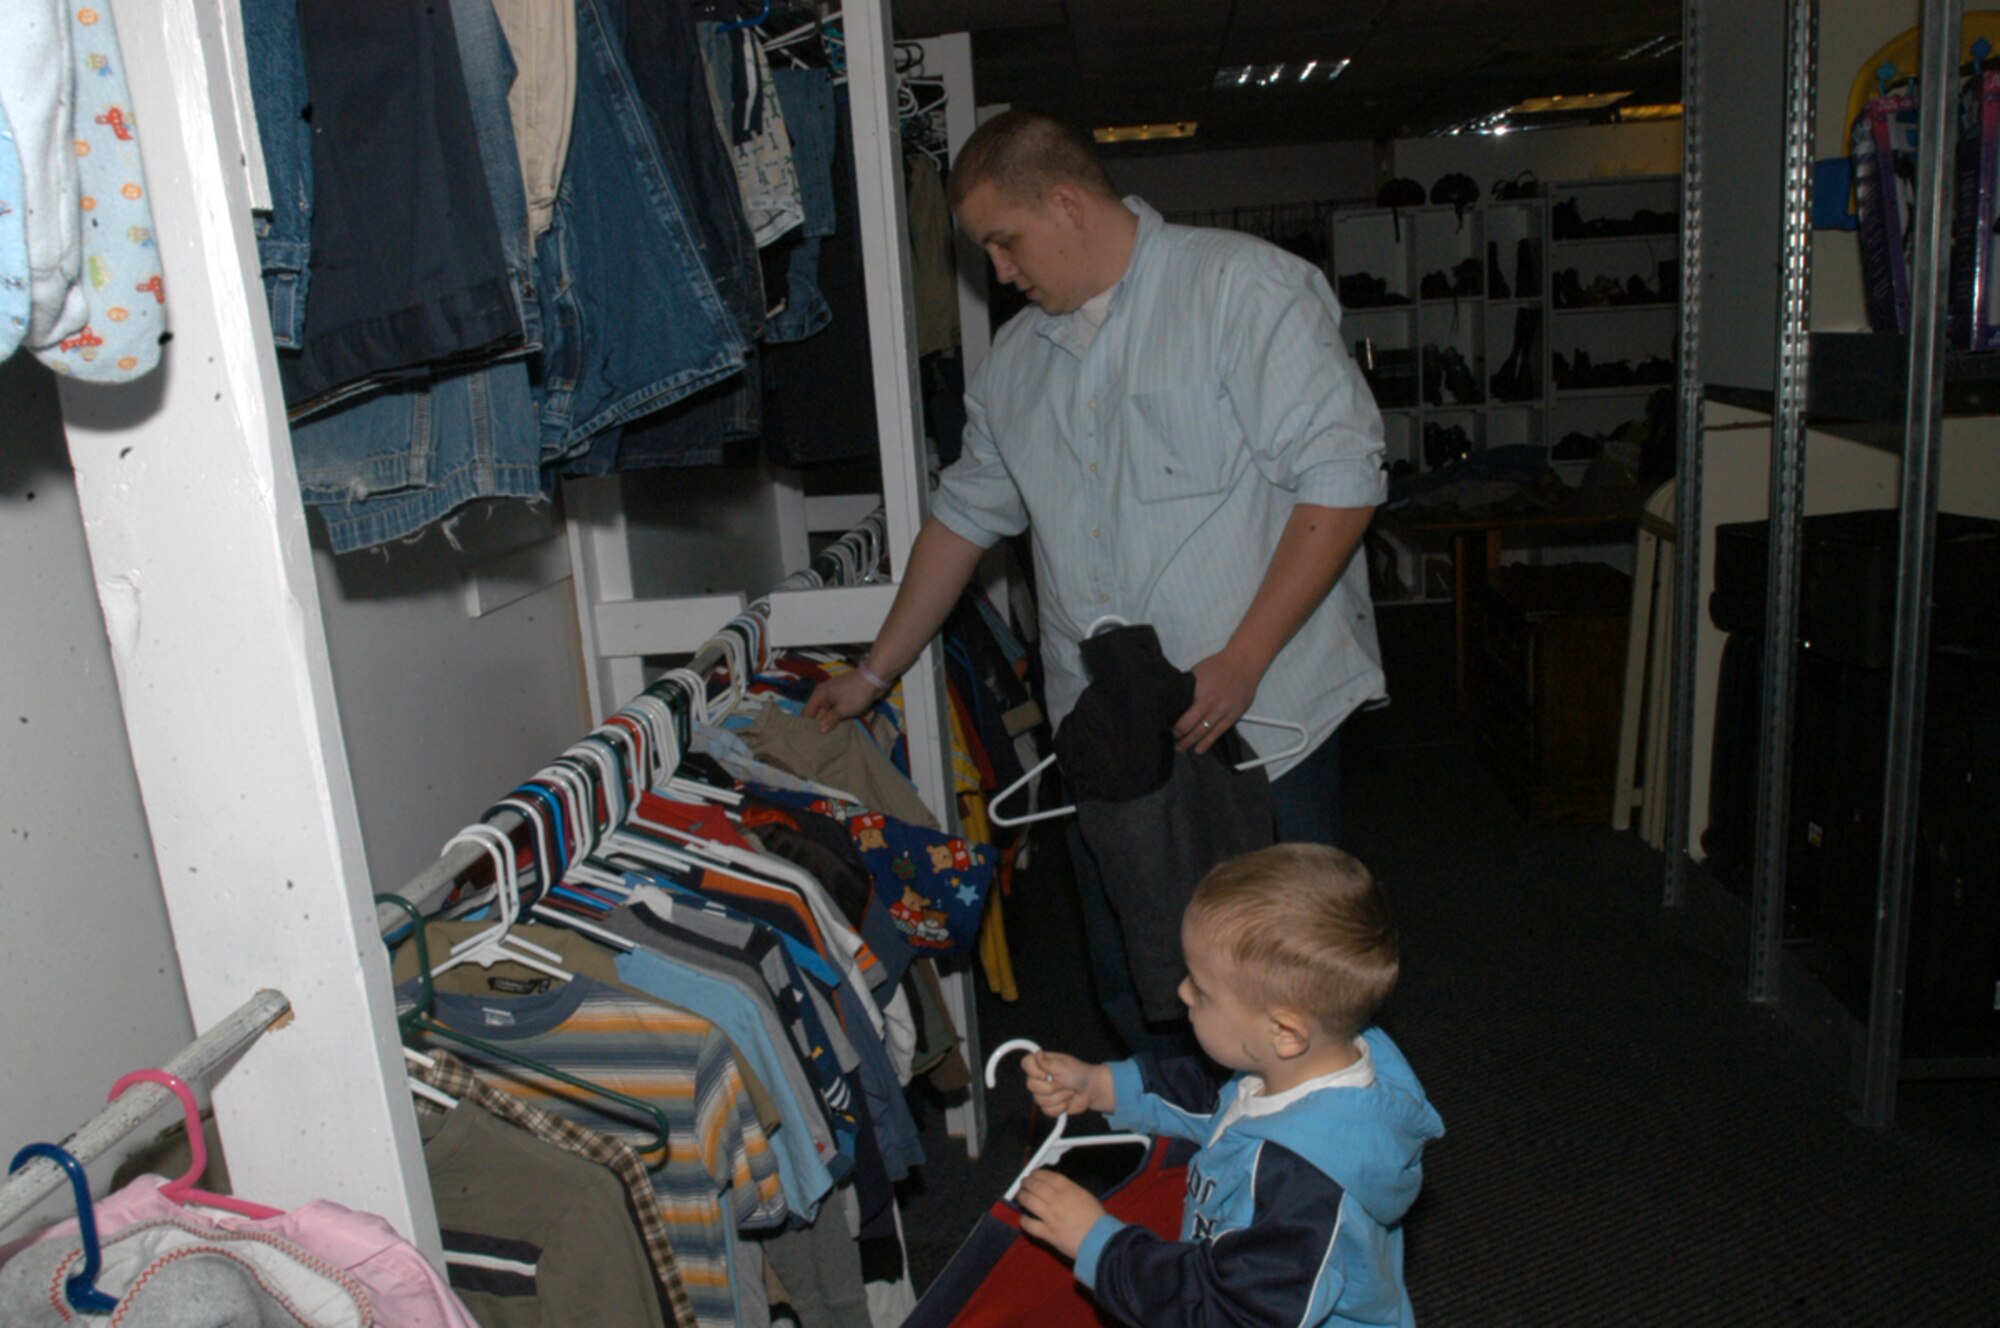 Jeremy Ferguson and his son Zachary, age 3, shop the clothes selection at the Airmen's Attic, RAF Lakenheath. (U.S. Air Force photo by Jill Fuson)